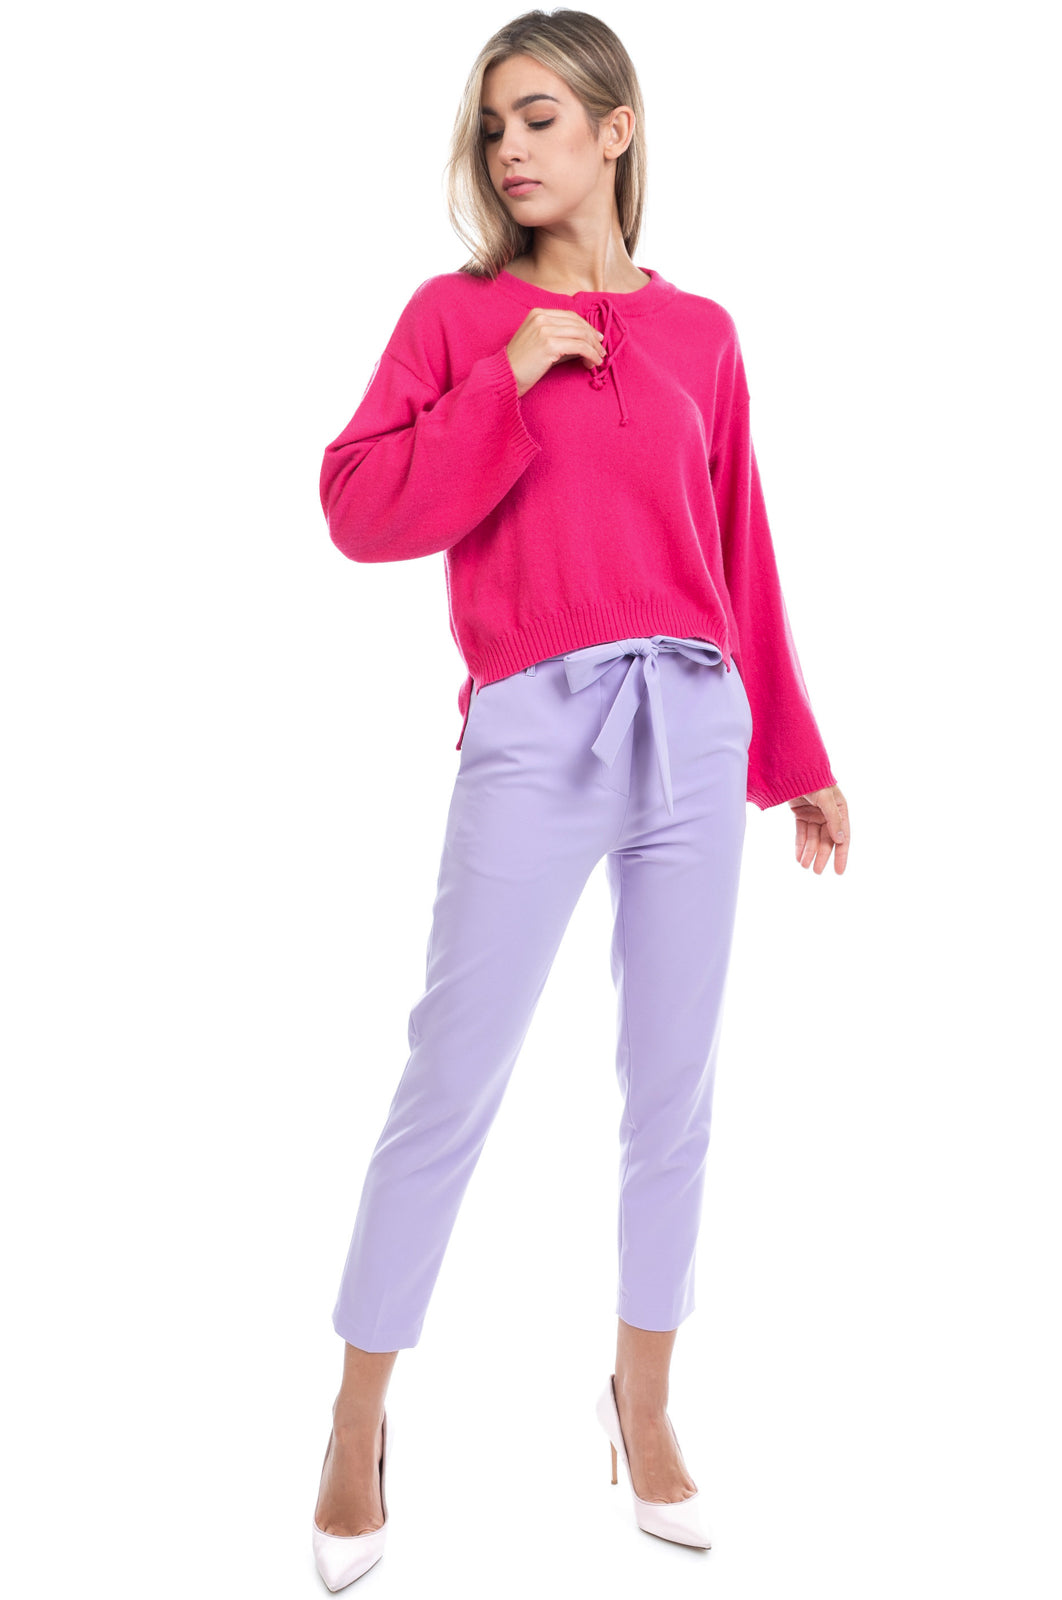 VICOLO Jumper One Size Pink Cashmere Angora - Wool Blend Thin Knit Made in Italy gallery main photo